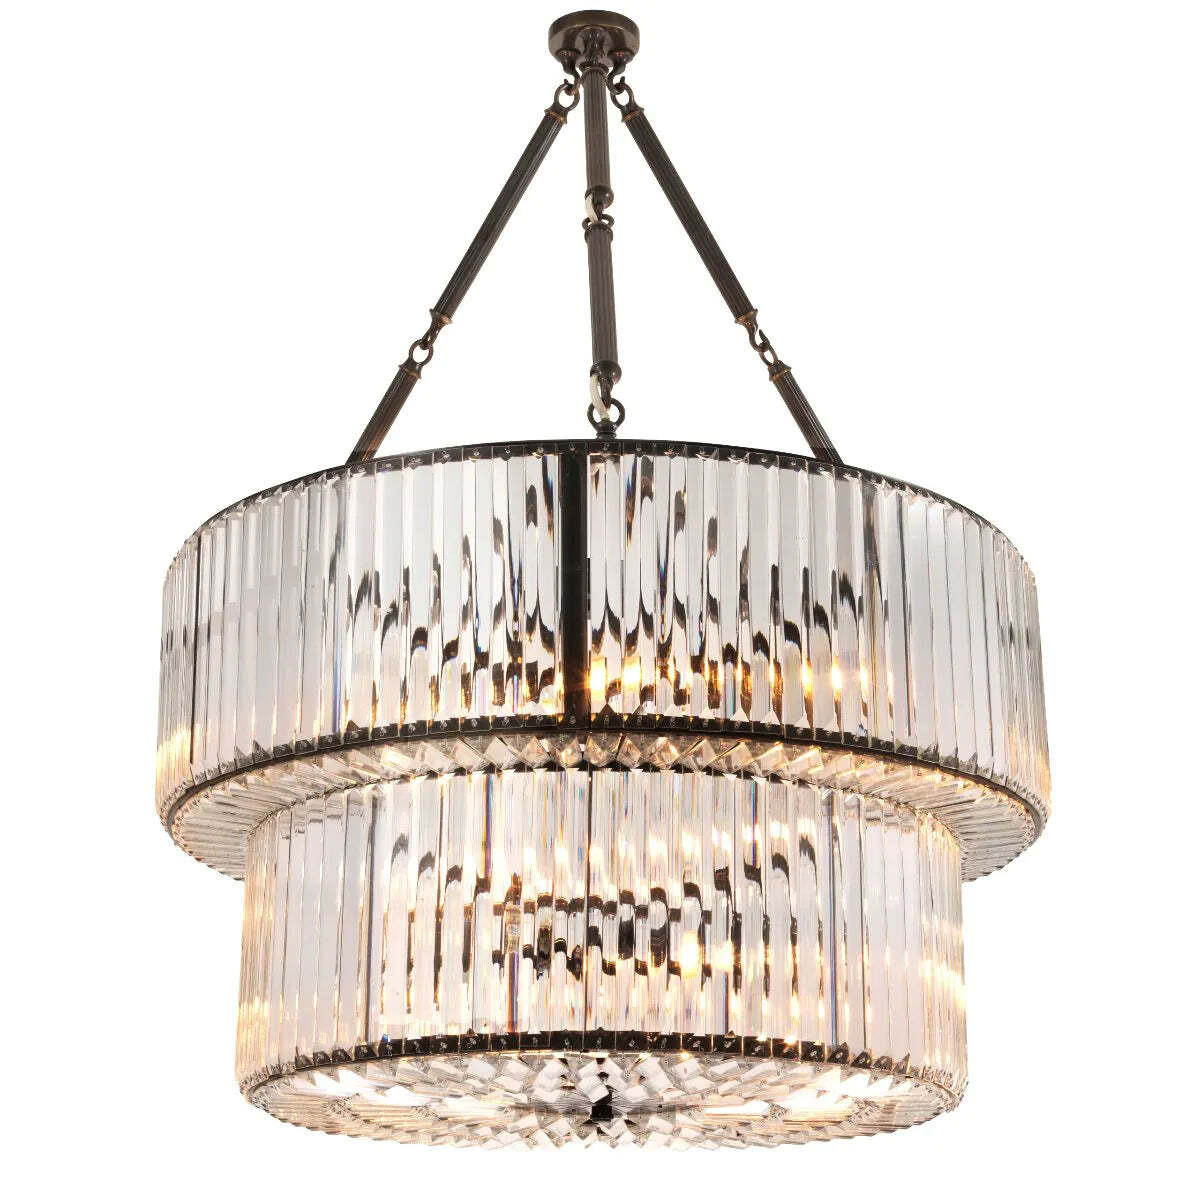 Eichholtz infinity Double Chandelier in Bronze Highlight Finish - image 1